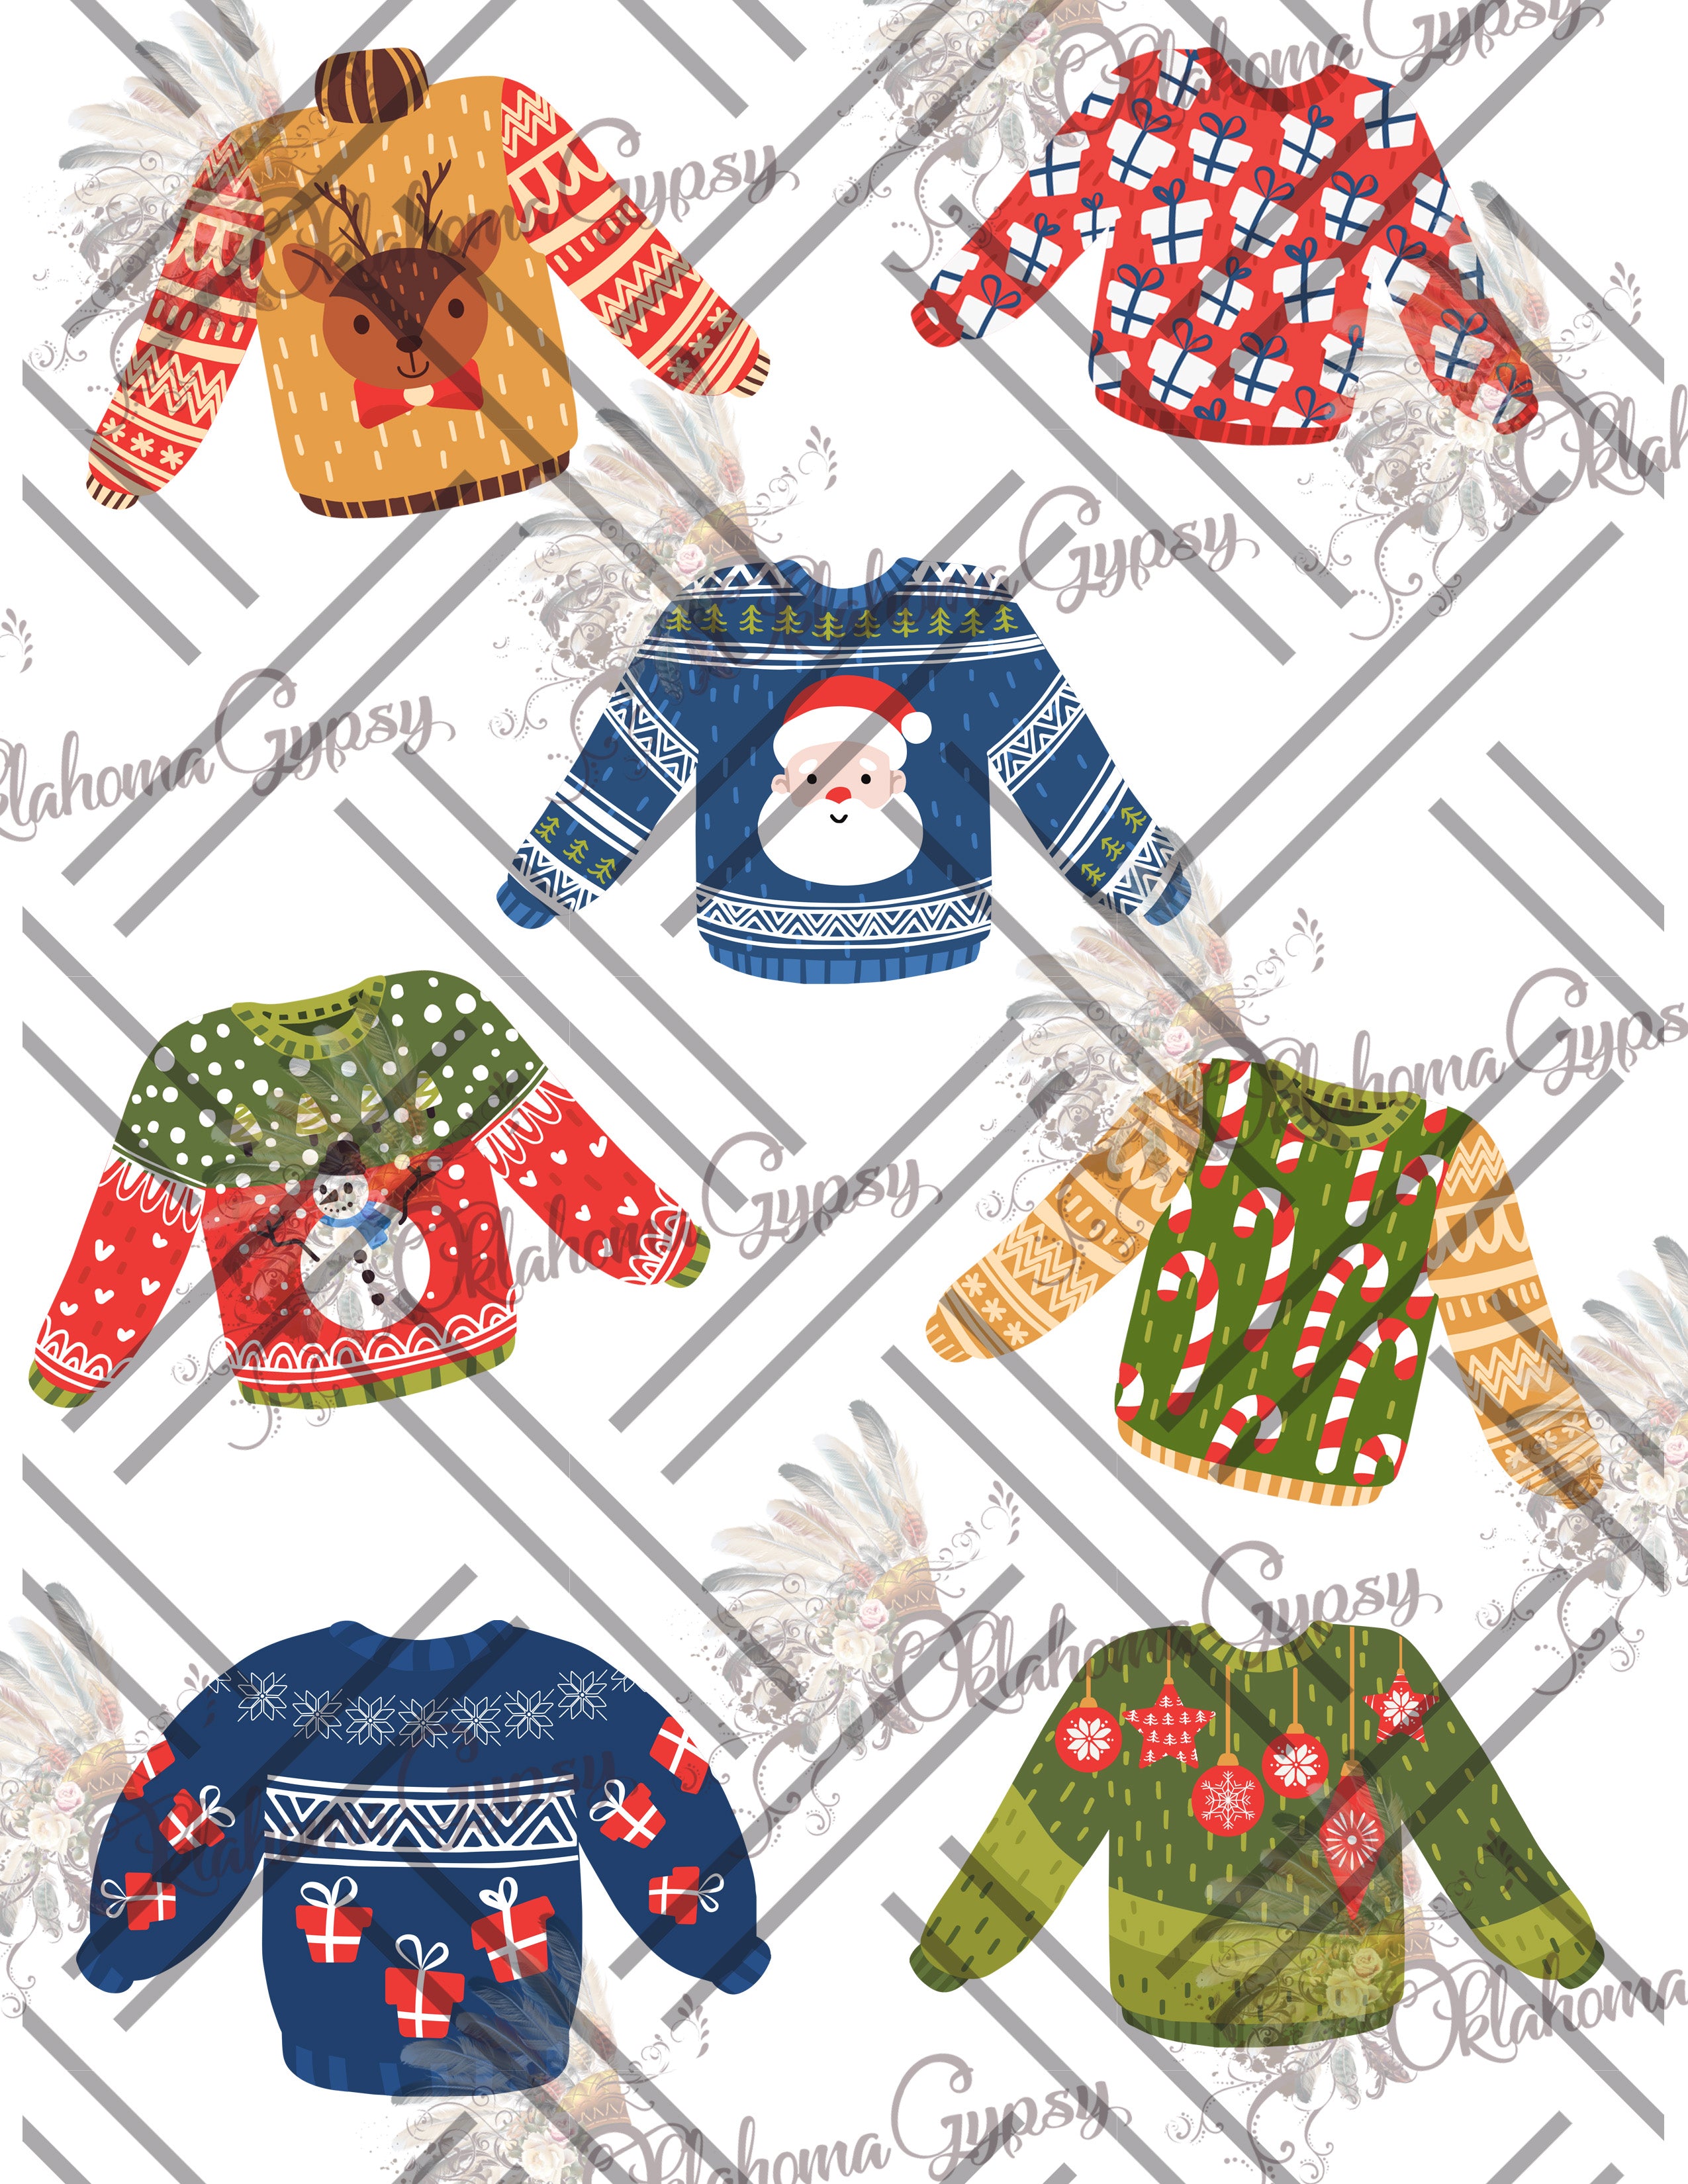 Ugly Christmas sweaters clipart, Cute Christmas sweater clip art